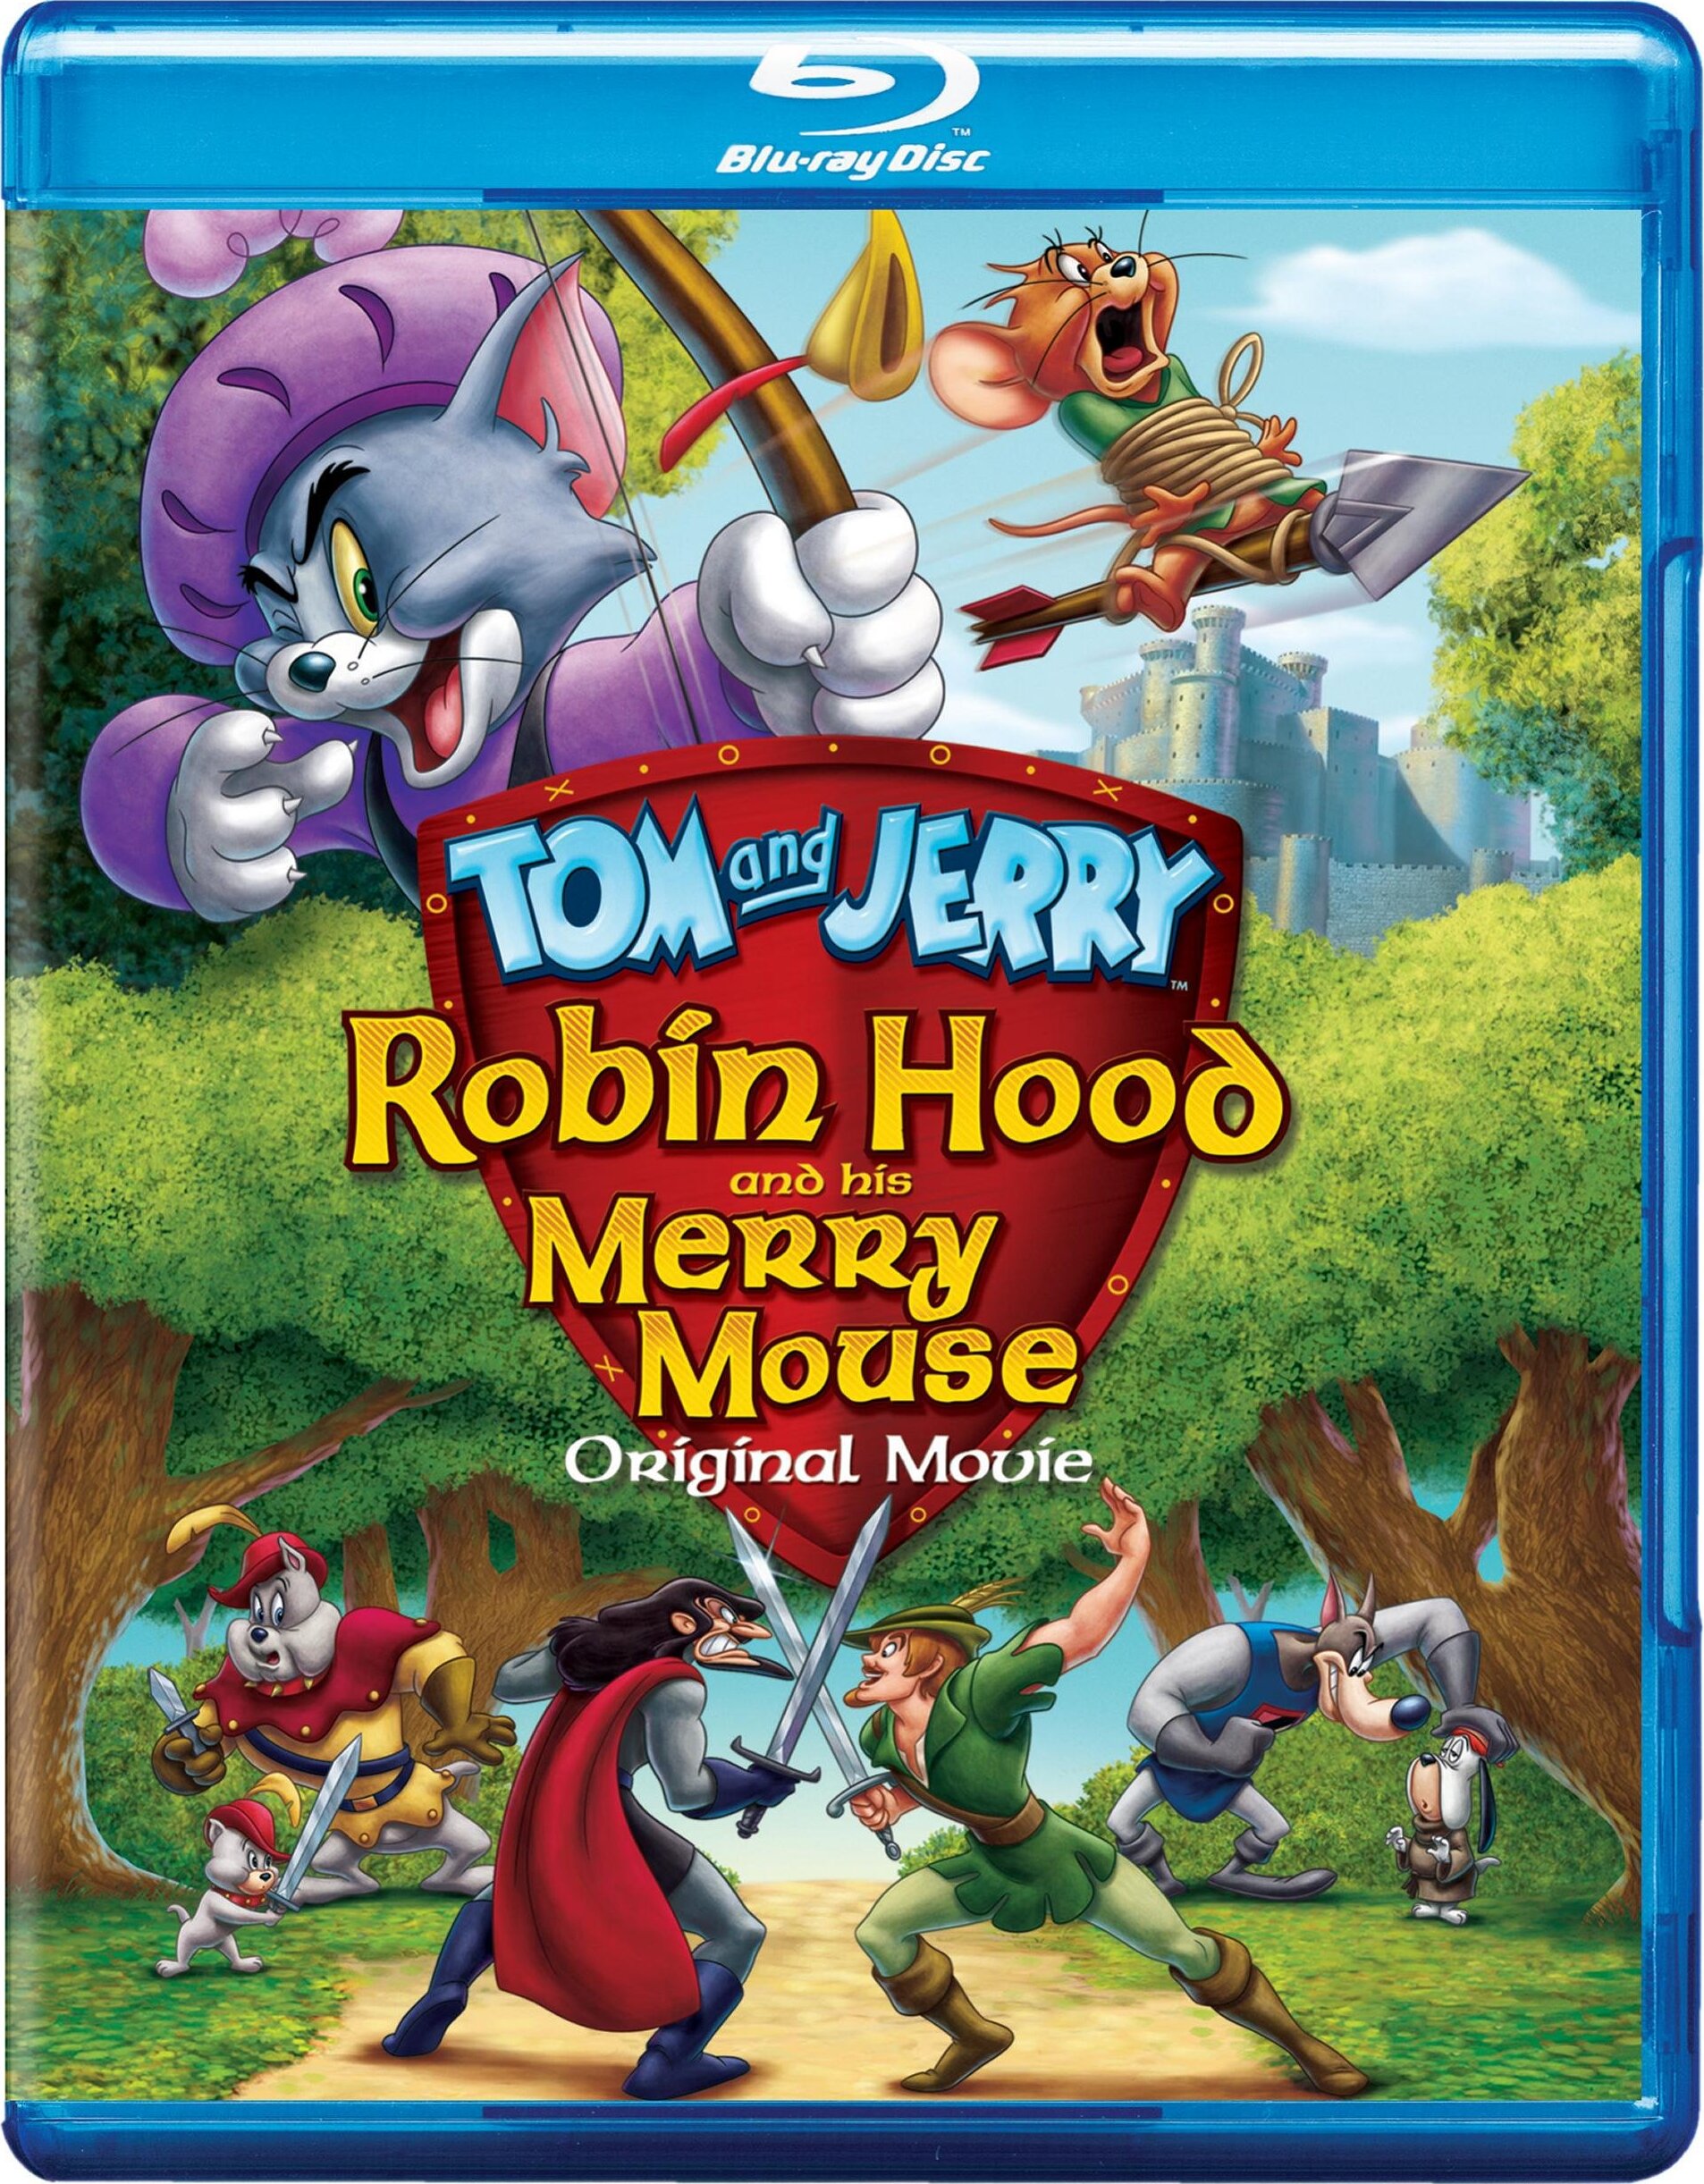 Tom and Jerry: Robin Hood and the Merry Mouse Blu-ray